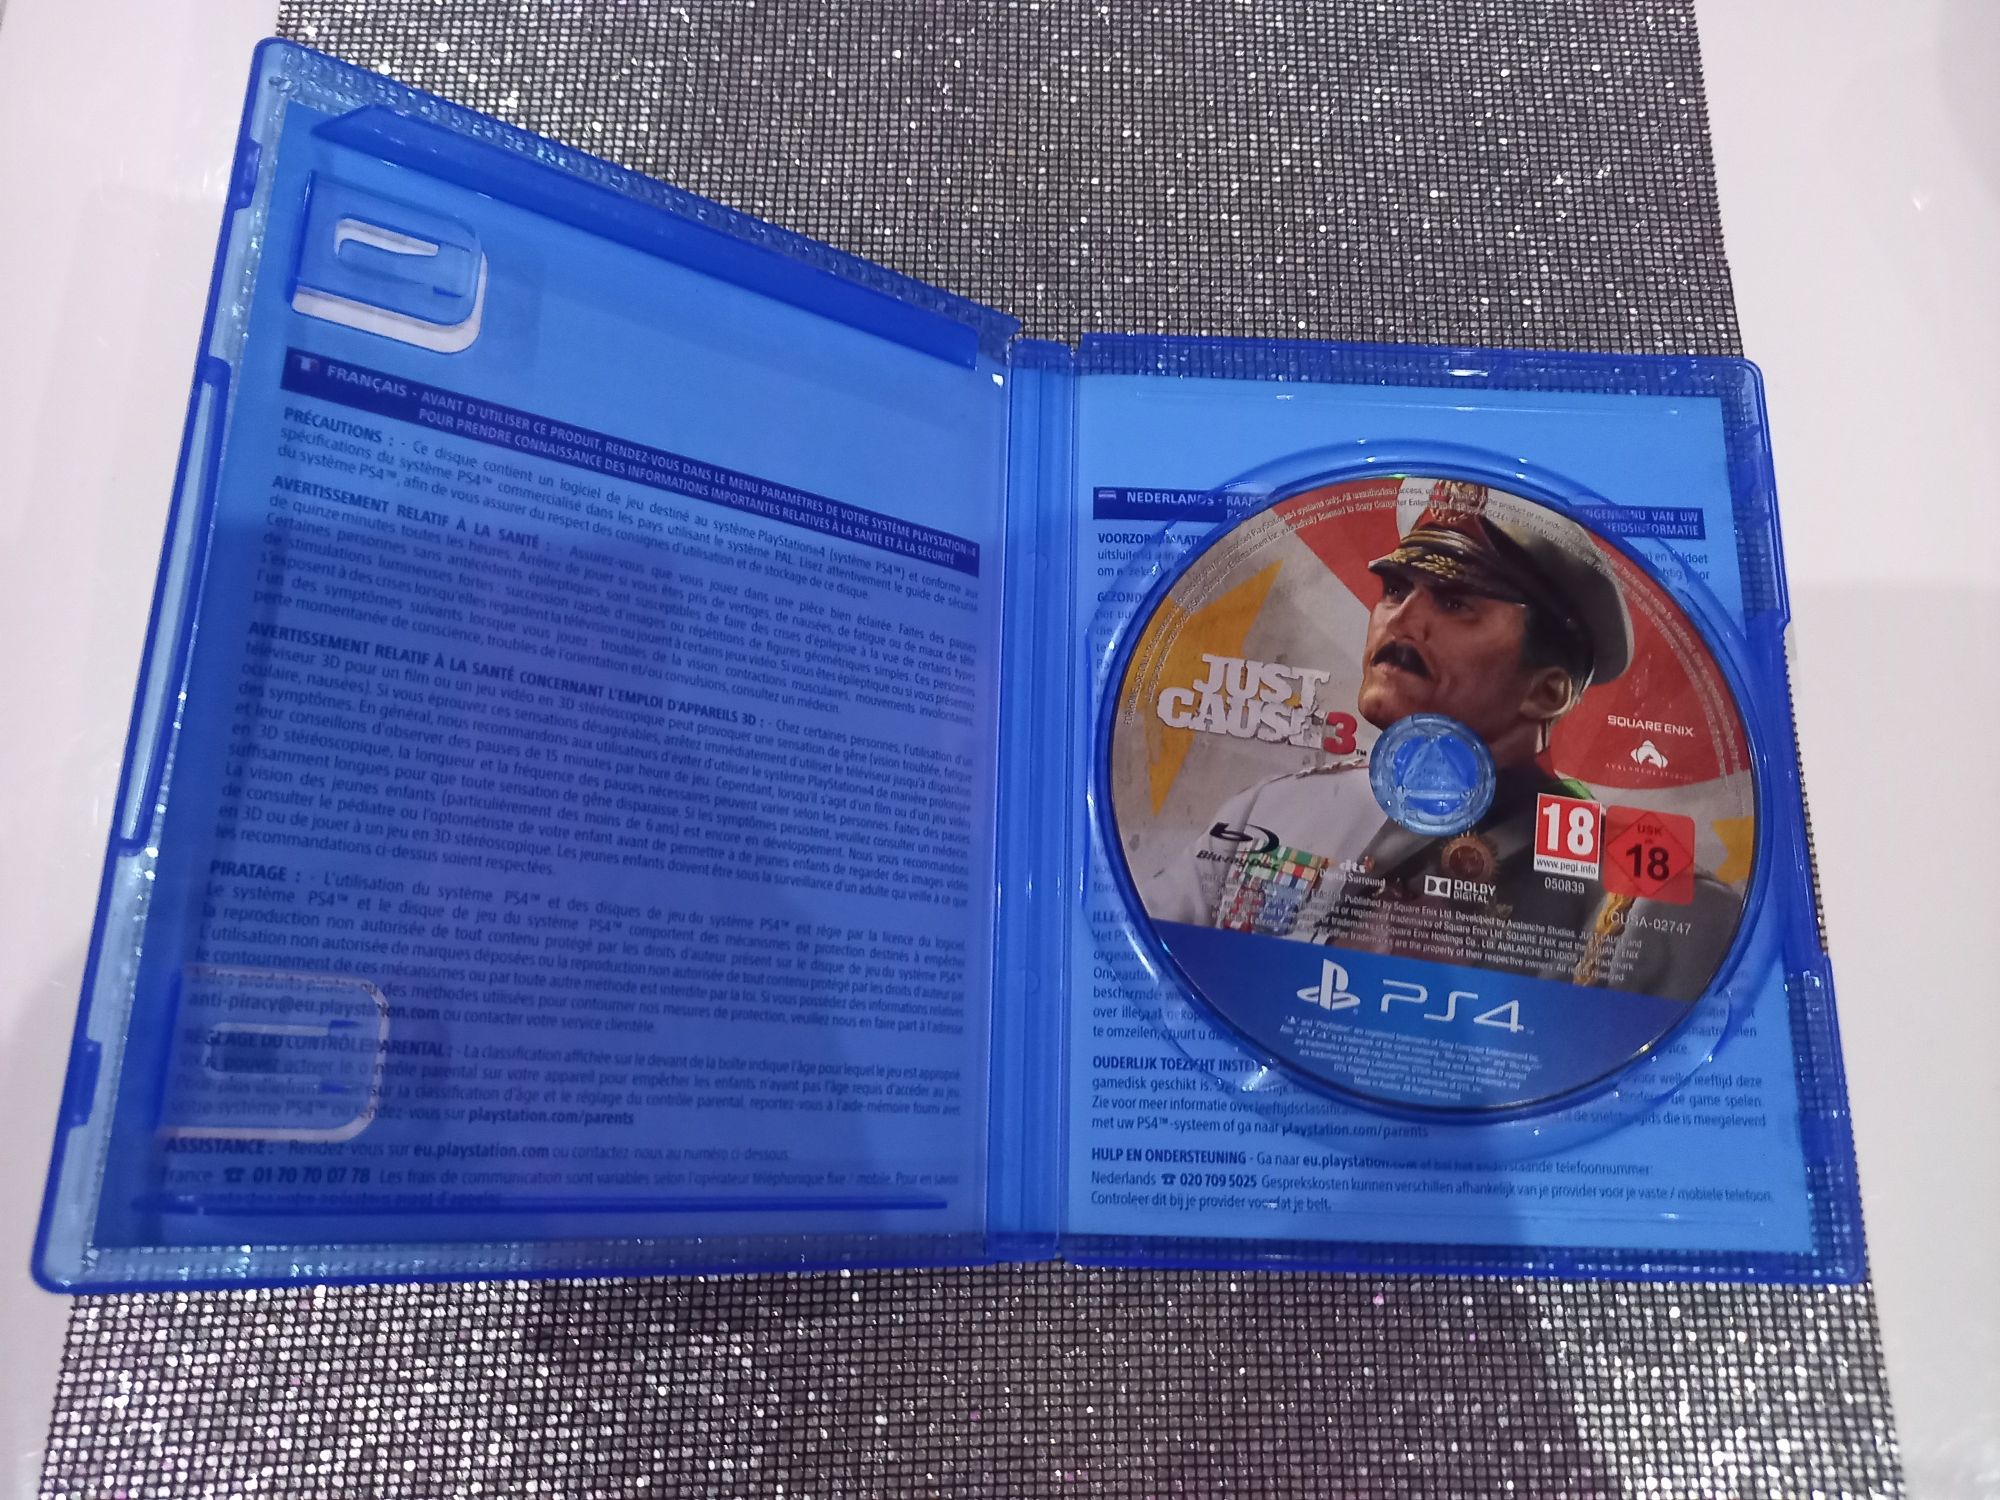 Gra Just Cause 3 Ps4 PlayStation 4